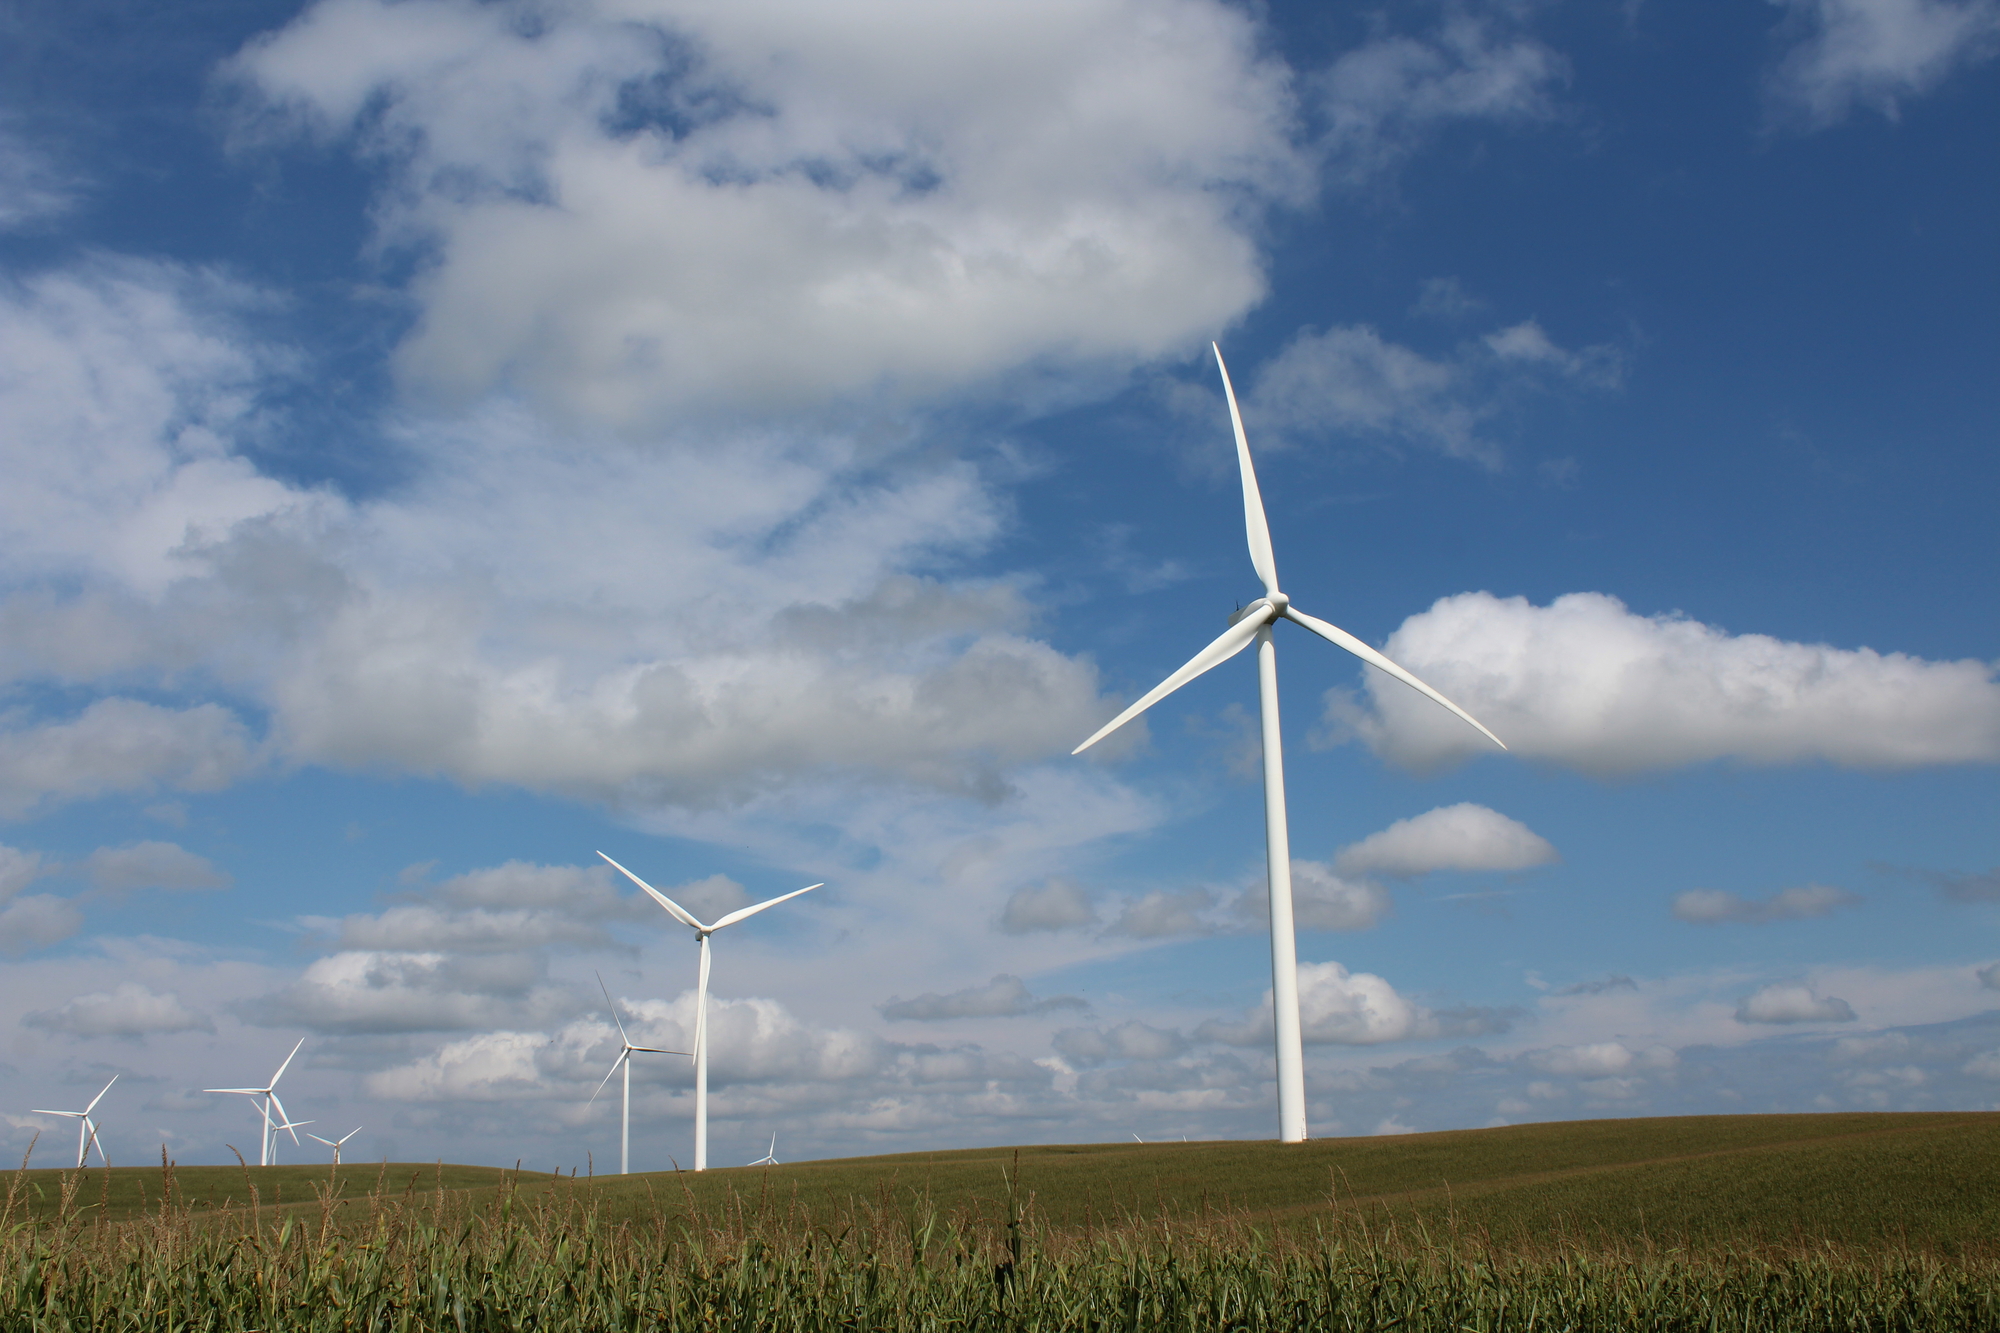 New report examines how to make local wind energy ordinances better